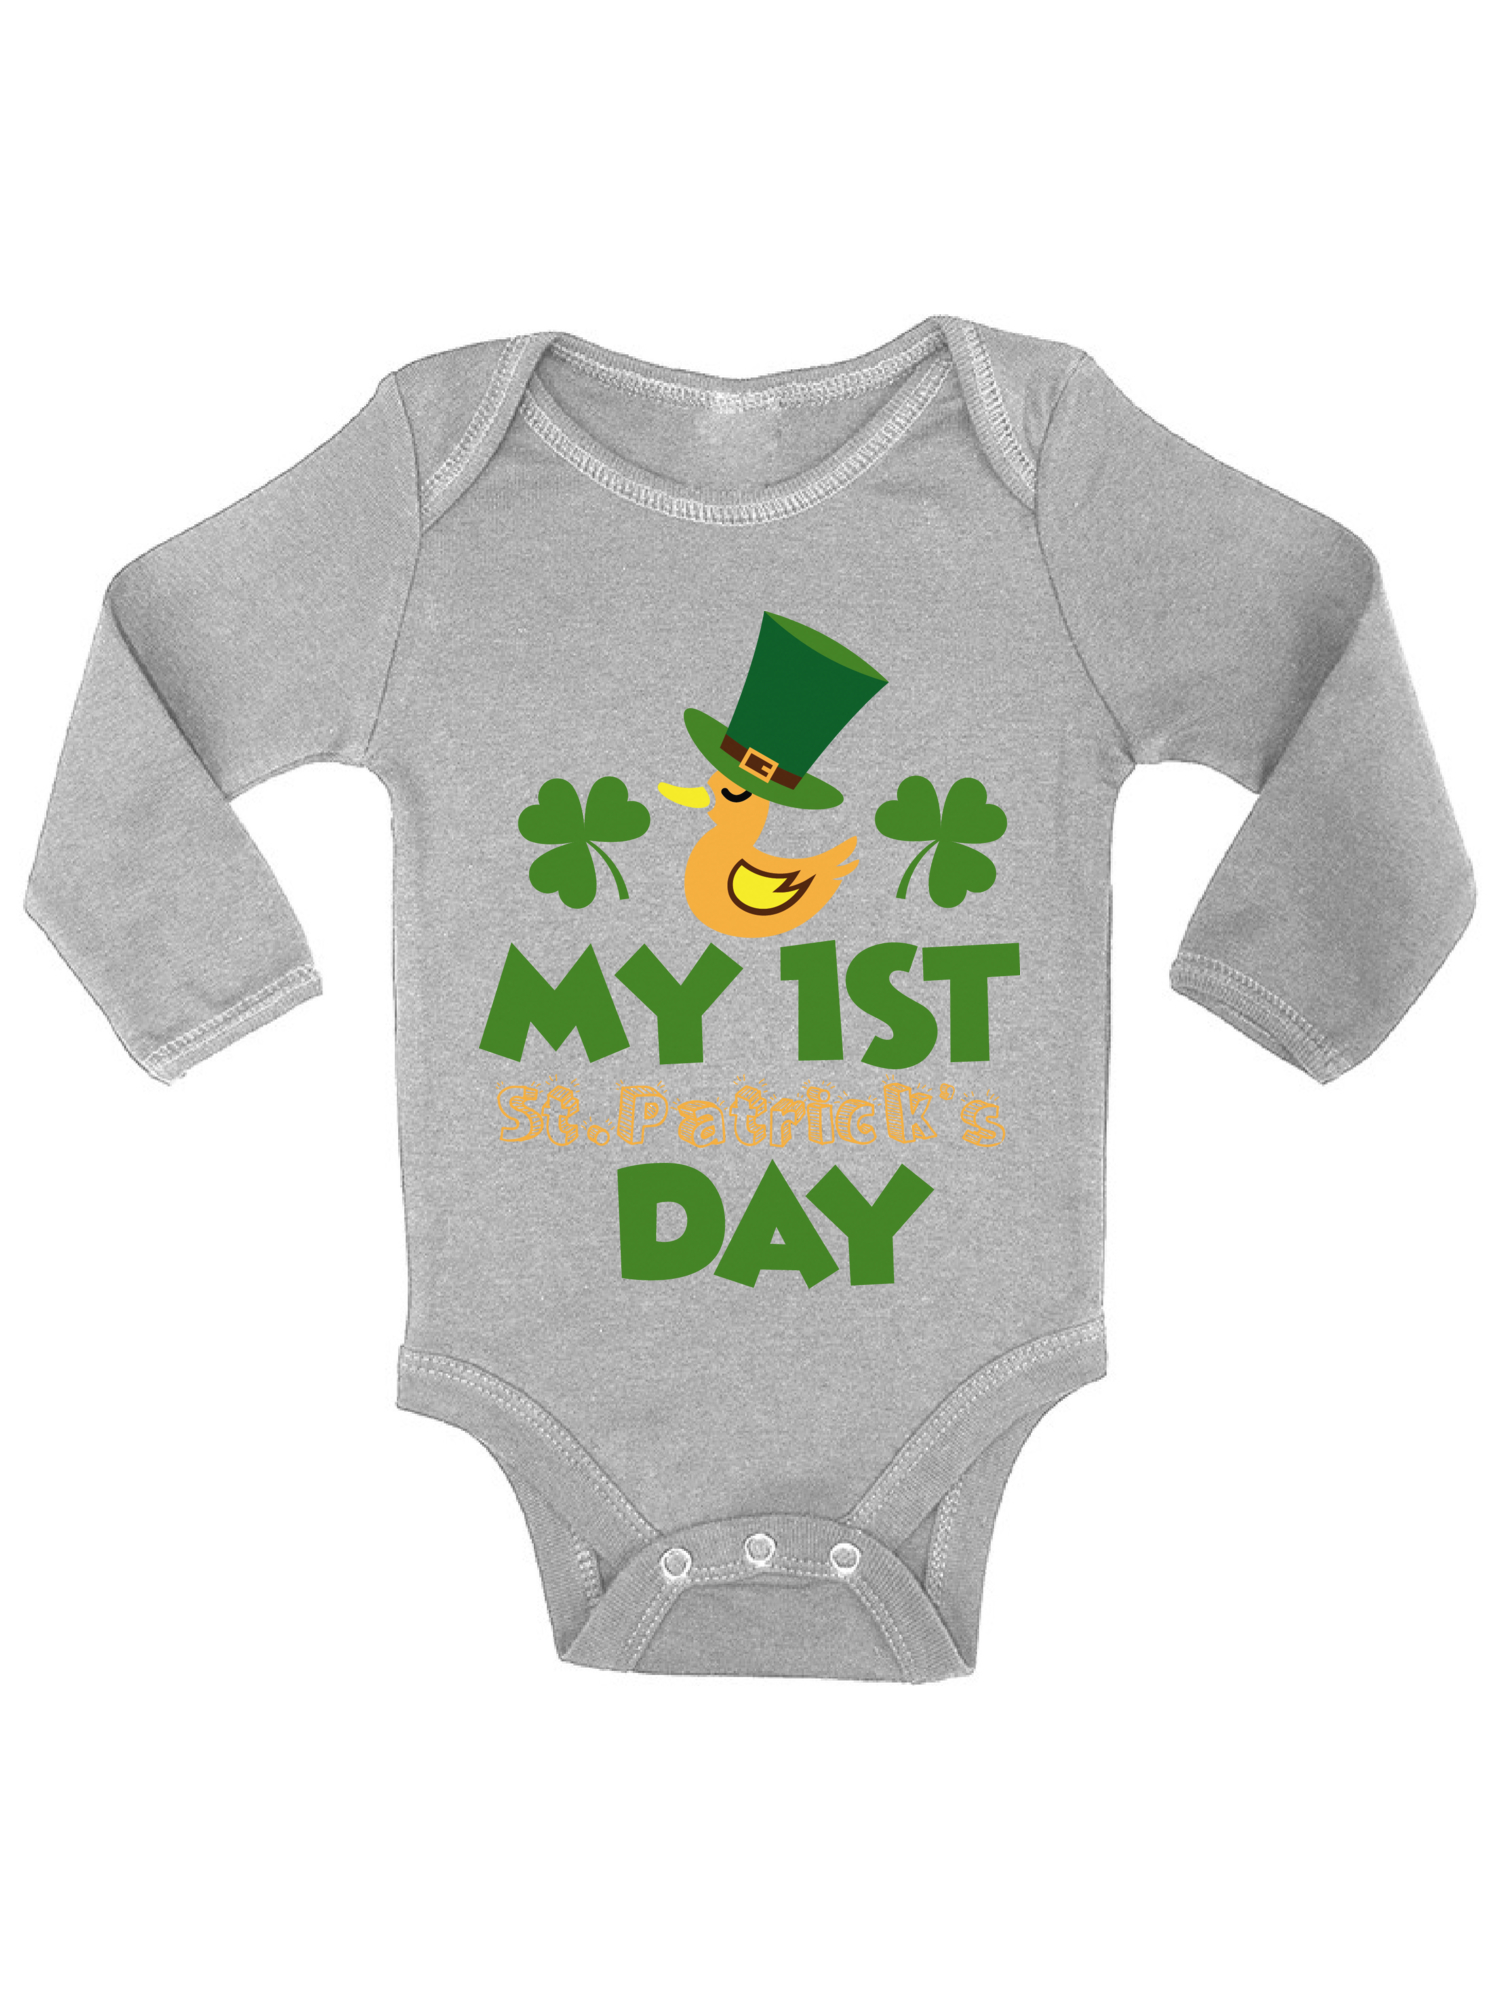 Awkward Styles Baby's First St. Patrick's Day Bodysuit Long Sleeve First St. Patrick's Day Outfit Saint Patrick One Piece Top Cute Irish Gifts for Newborn Baby Lucky Irish Baby One Piece Top - image 1 of 4